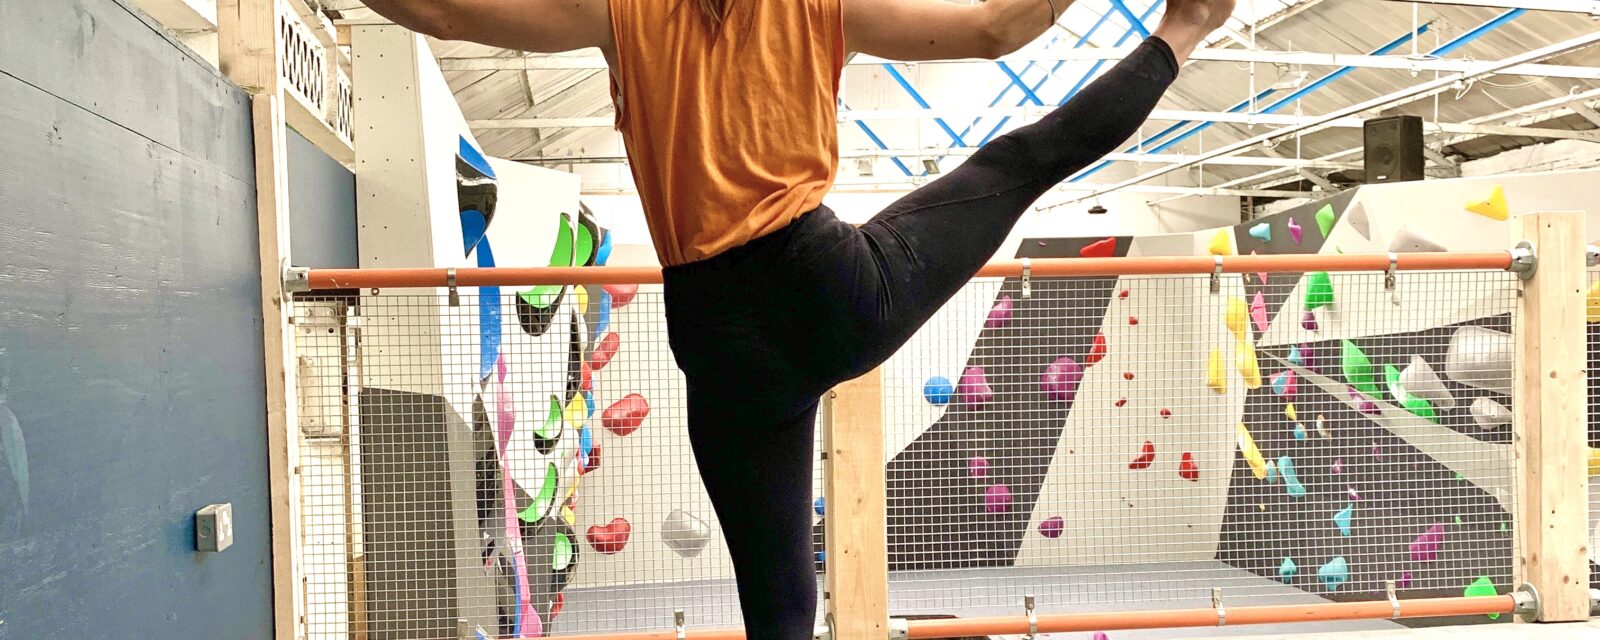 yoga posture in front of climbing wall